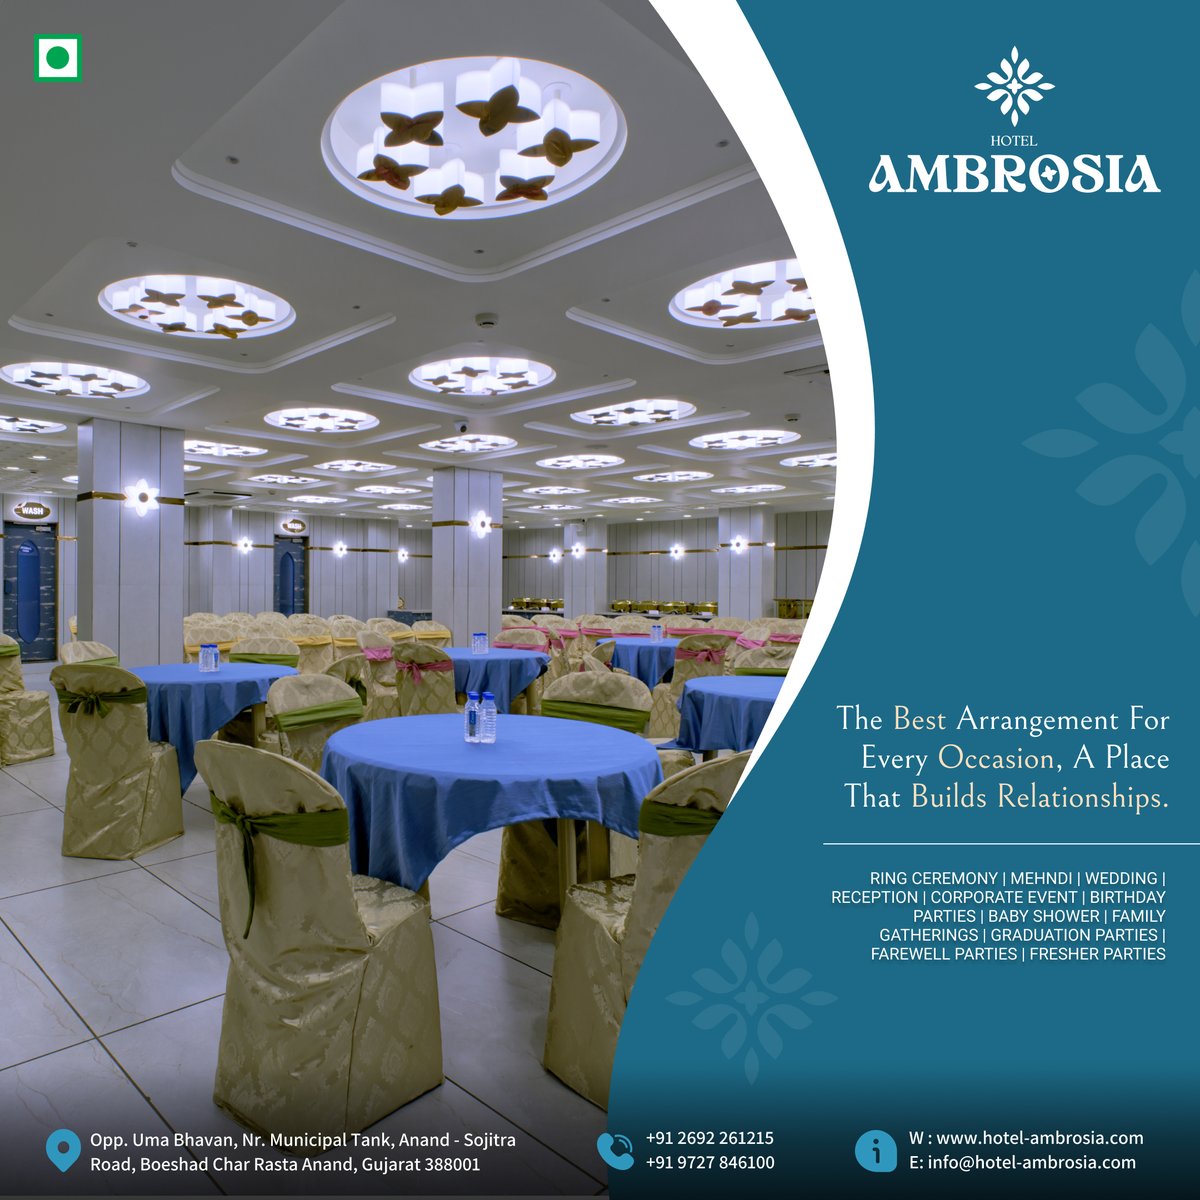 The Best Arrangement For Every Occasion, A Place That Builds Relationships.

#Ambrosia #Ambrosiarestaurant #banquet #Rooms #UmaBhavan #anand #tastyfood #yummyfood #celebrations #partiesandevents #lifeevents #decorations #Ringceremony #birthdaycelebration